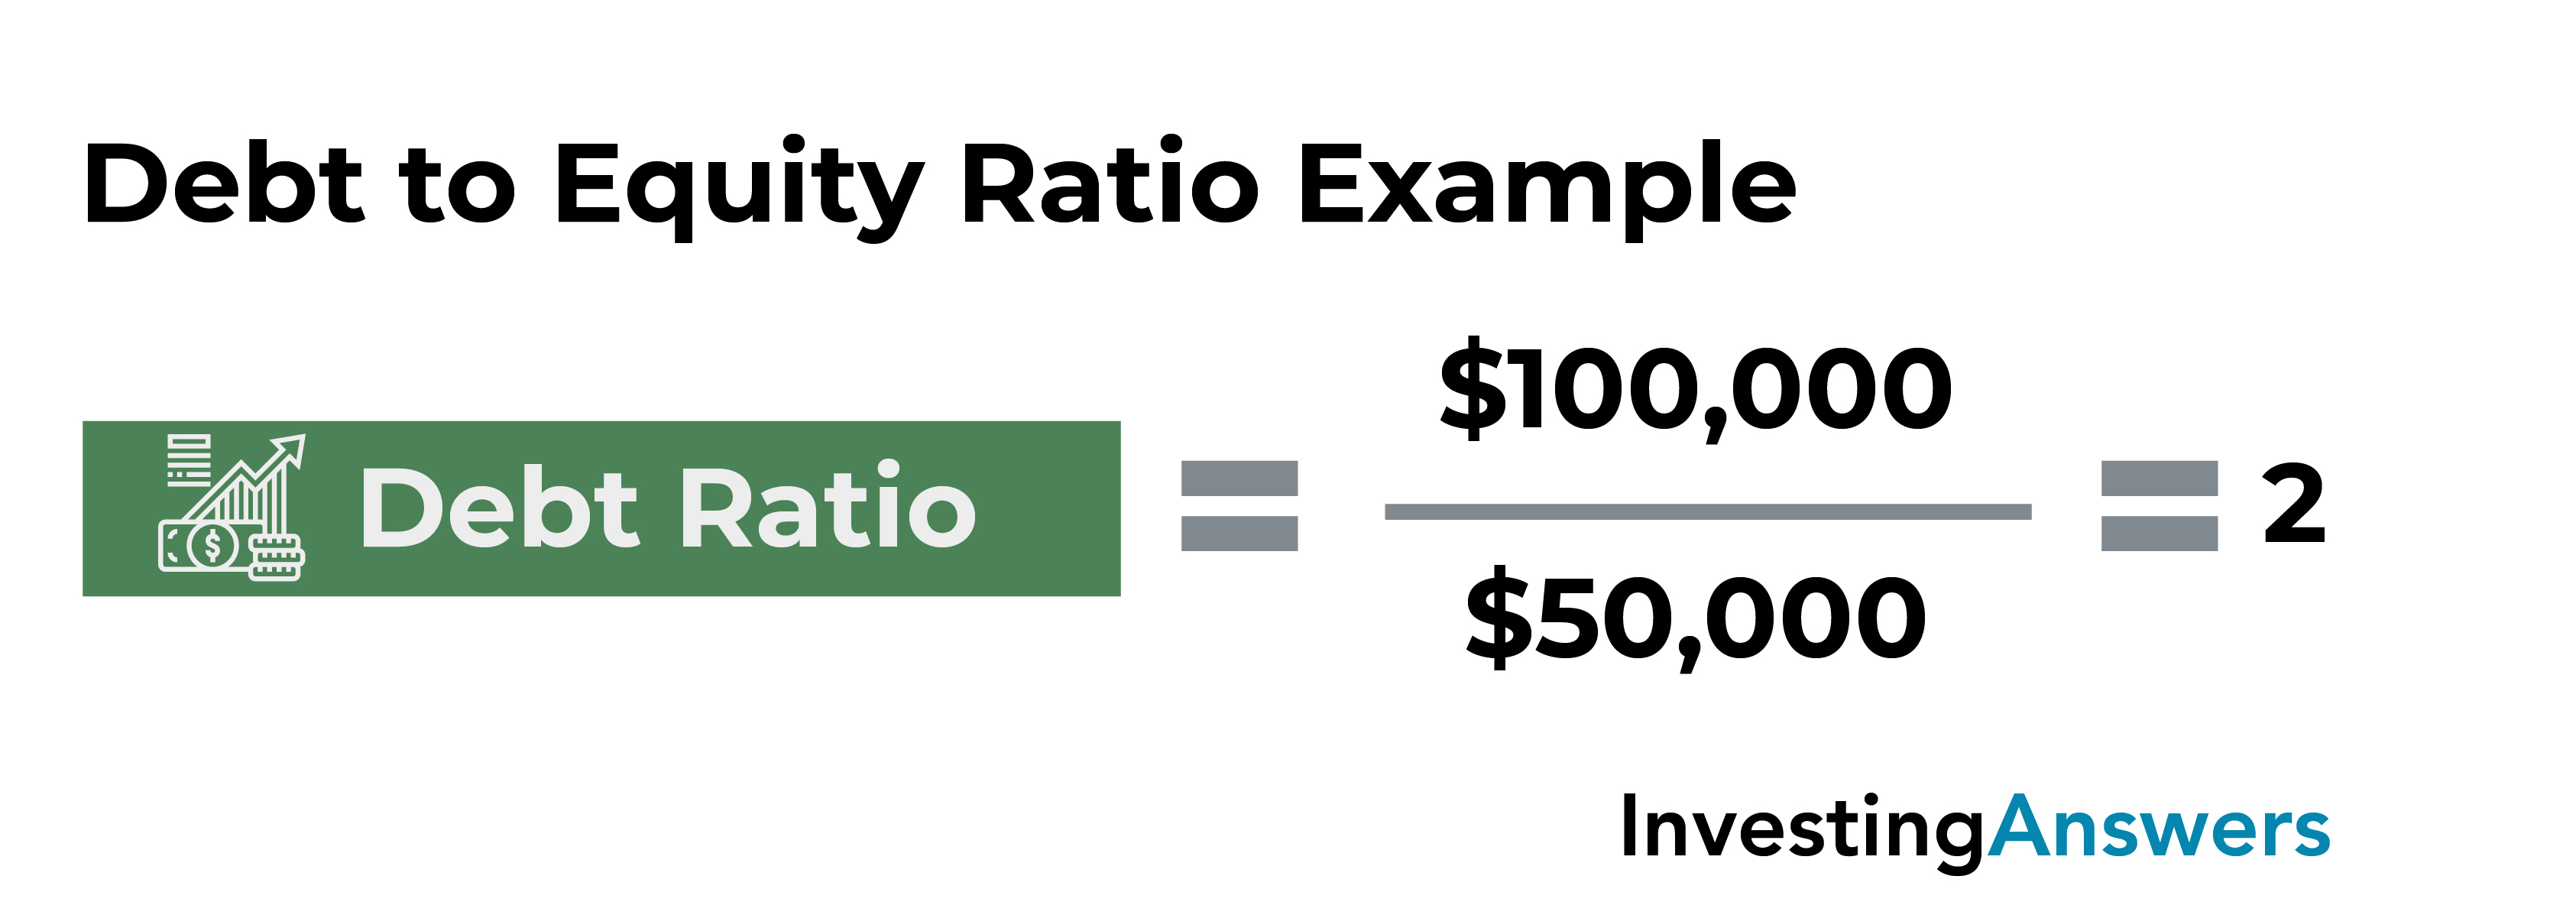 debt to equity ratio example